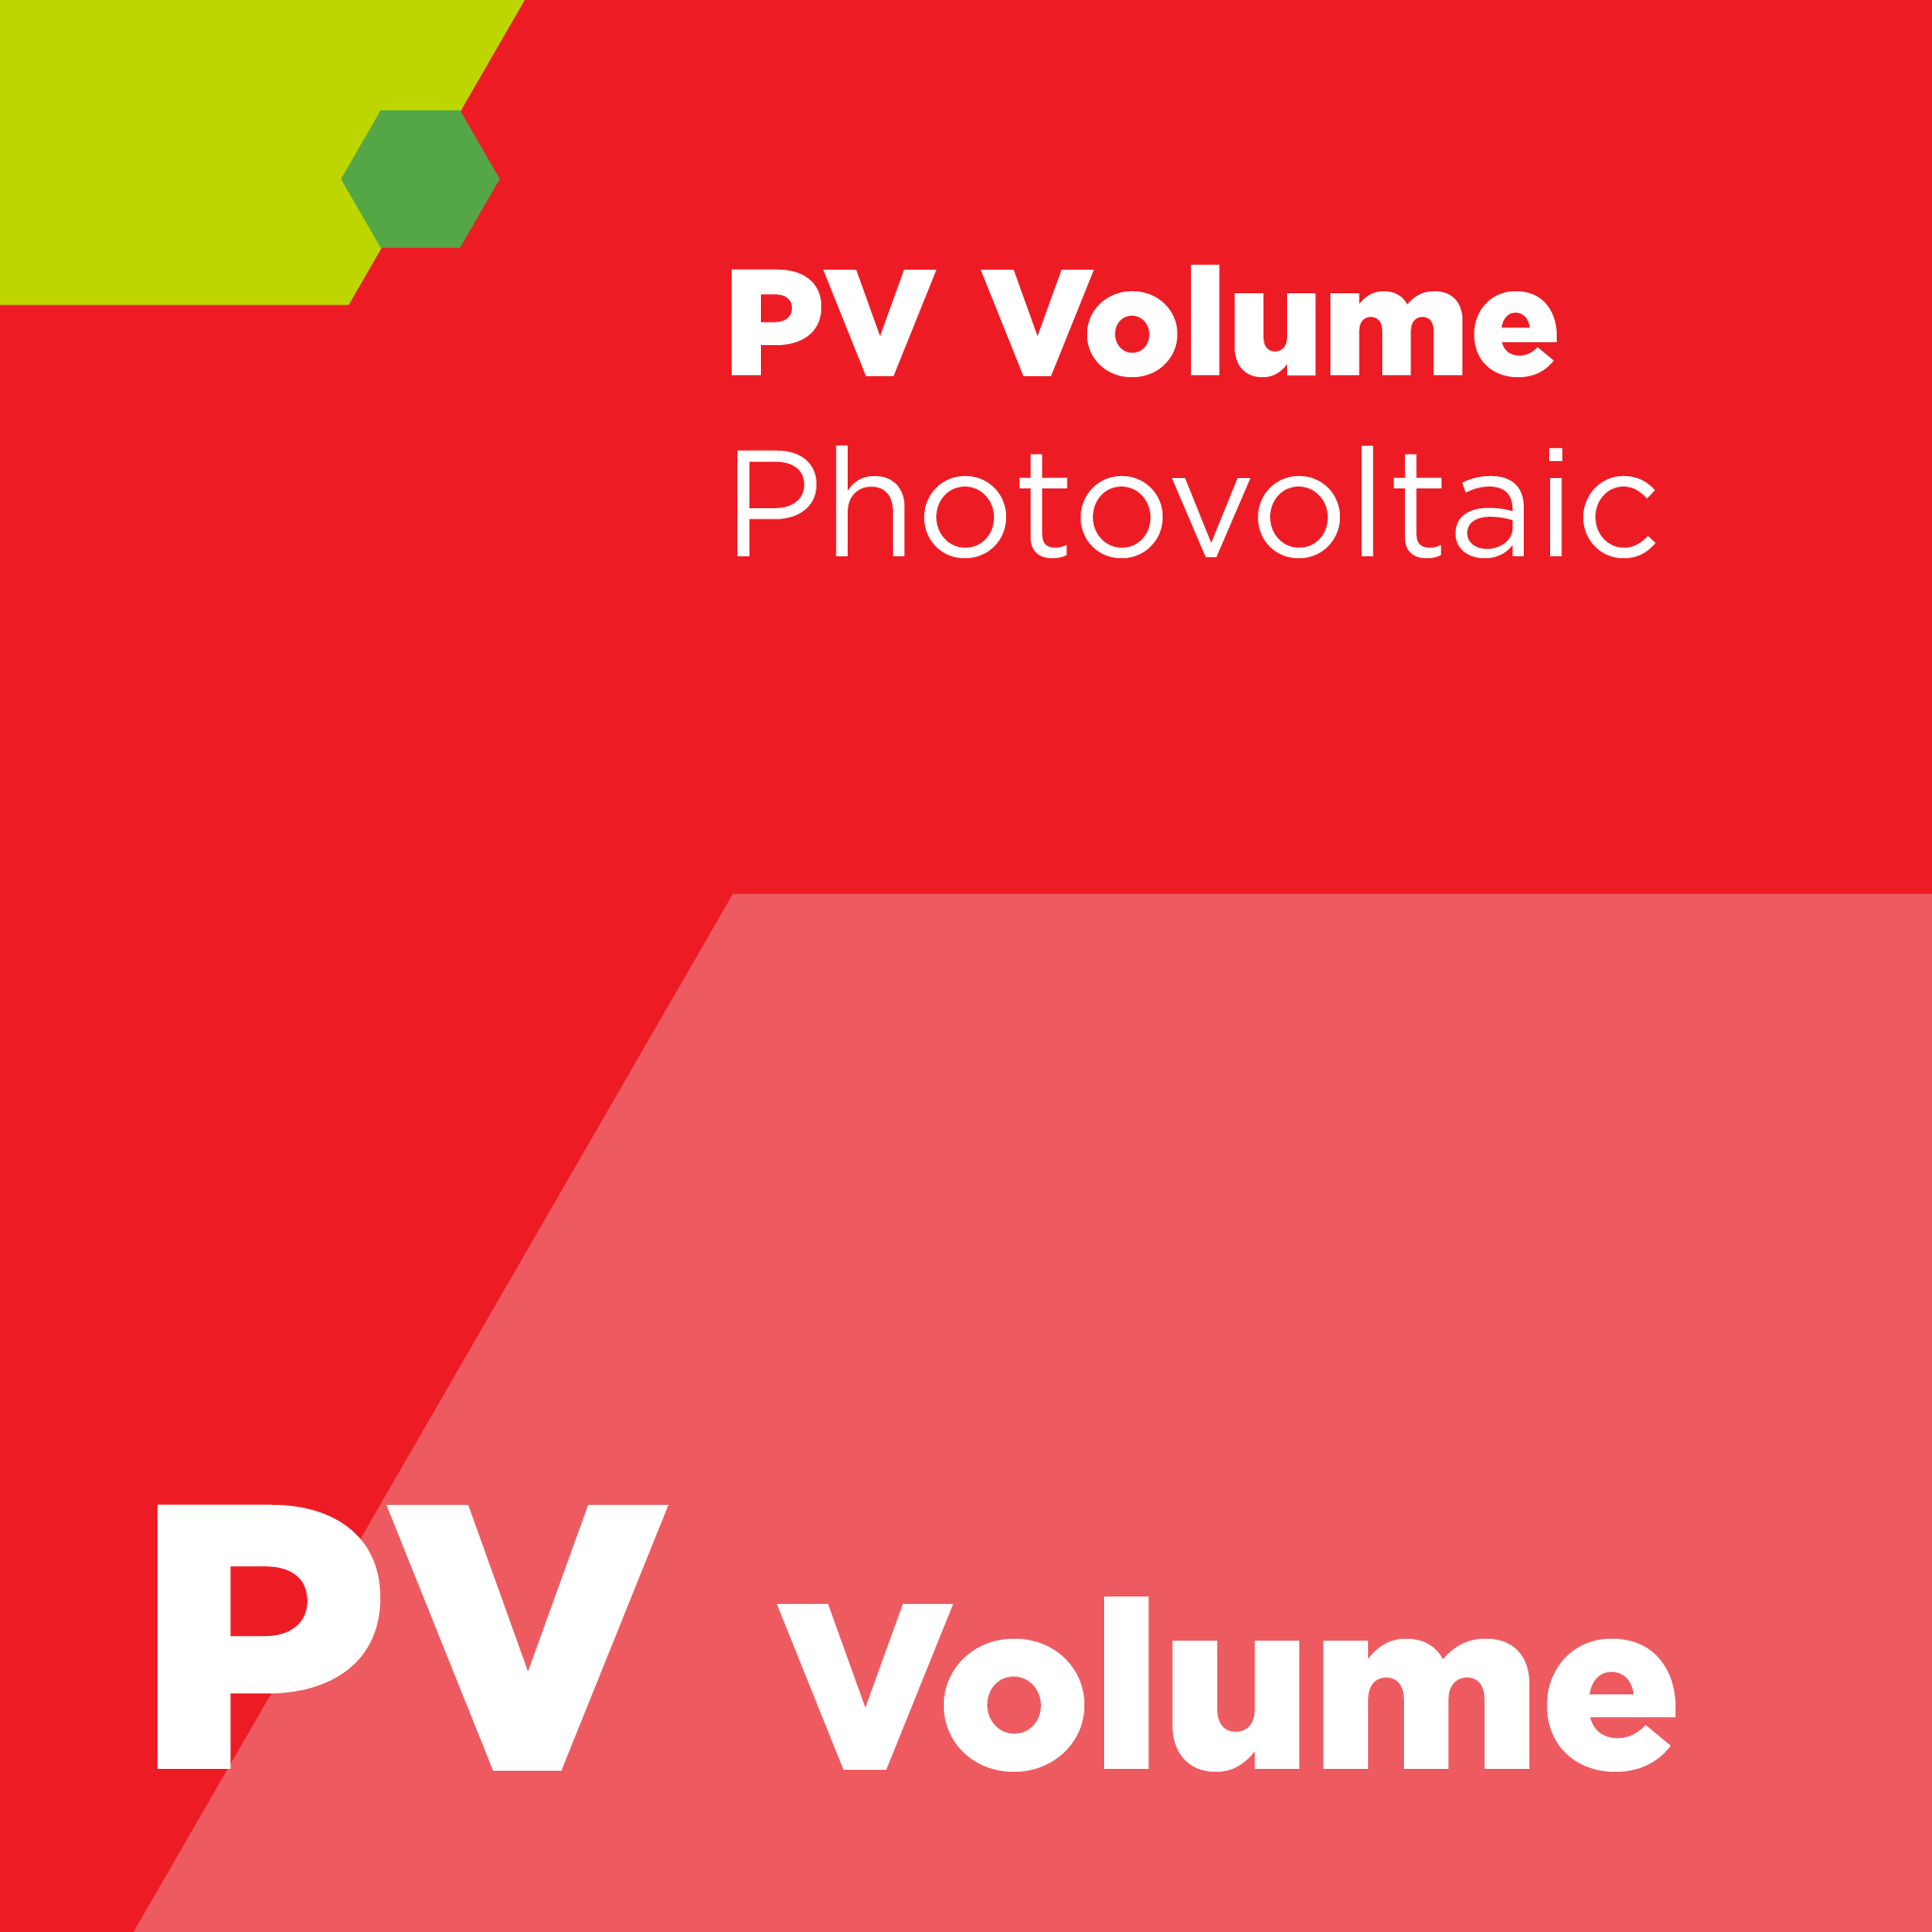 PV03300 - SEMI PV33 - Specification for Sulfuric Acid Used in Photovoltaic Applications